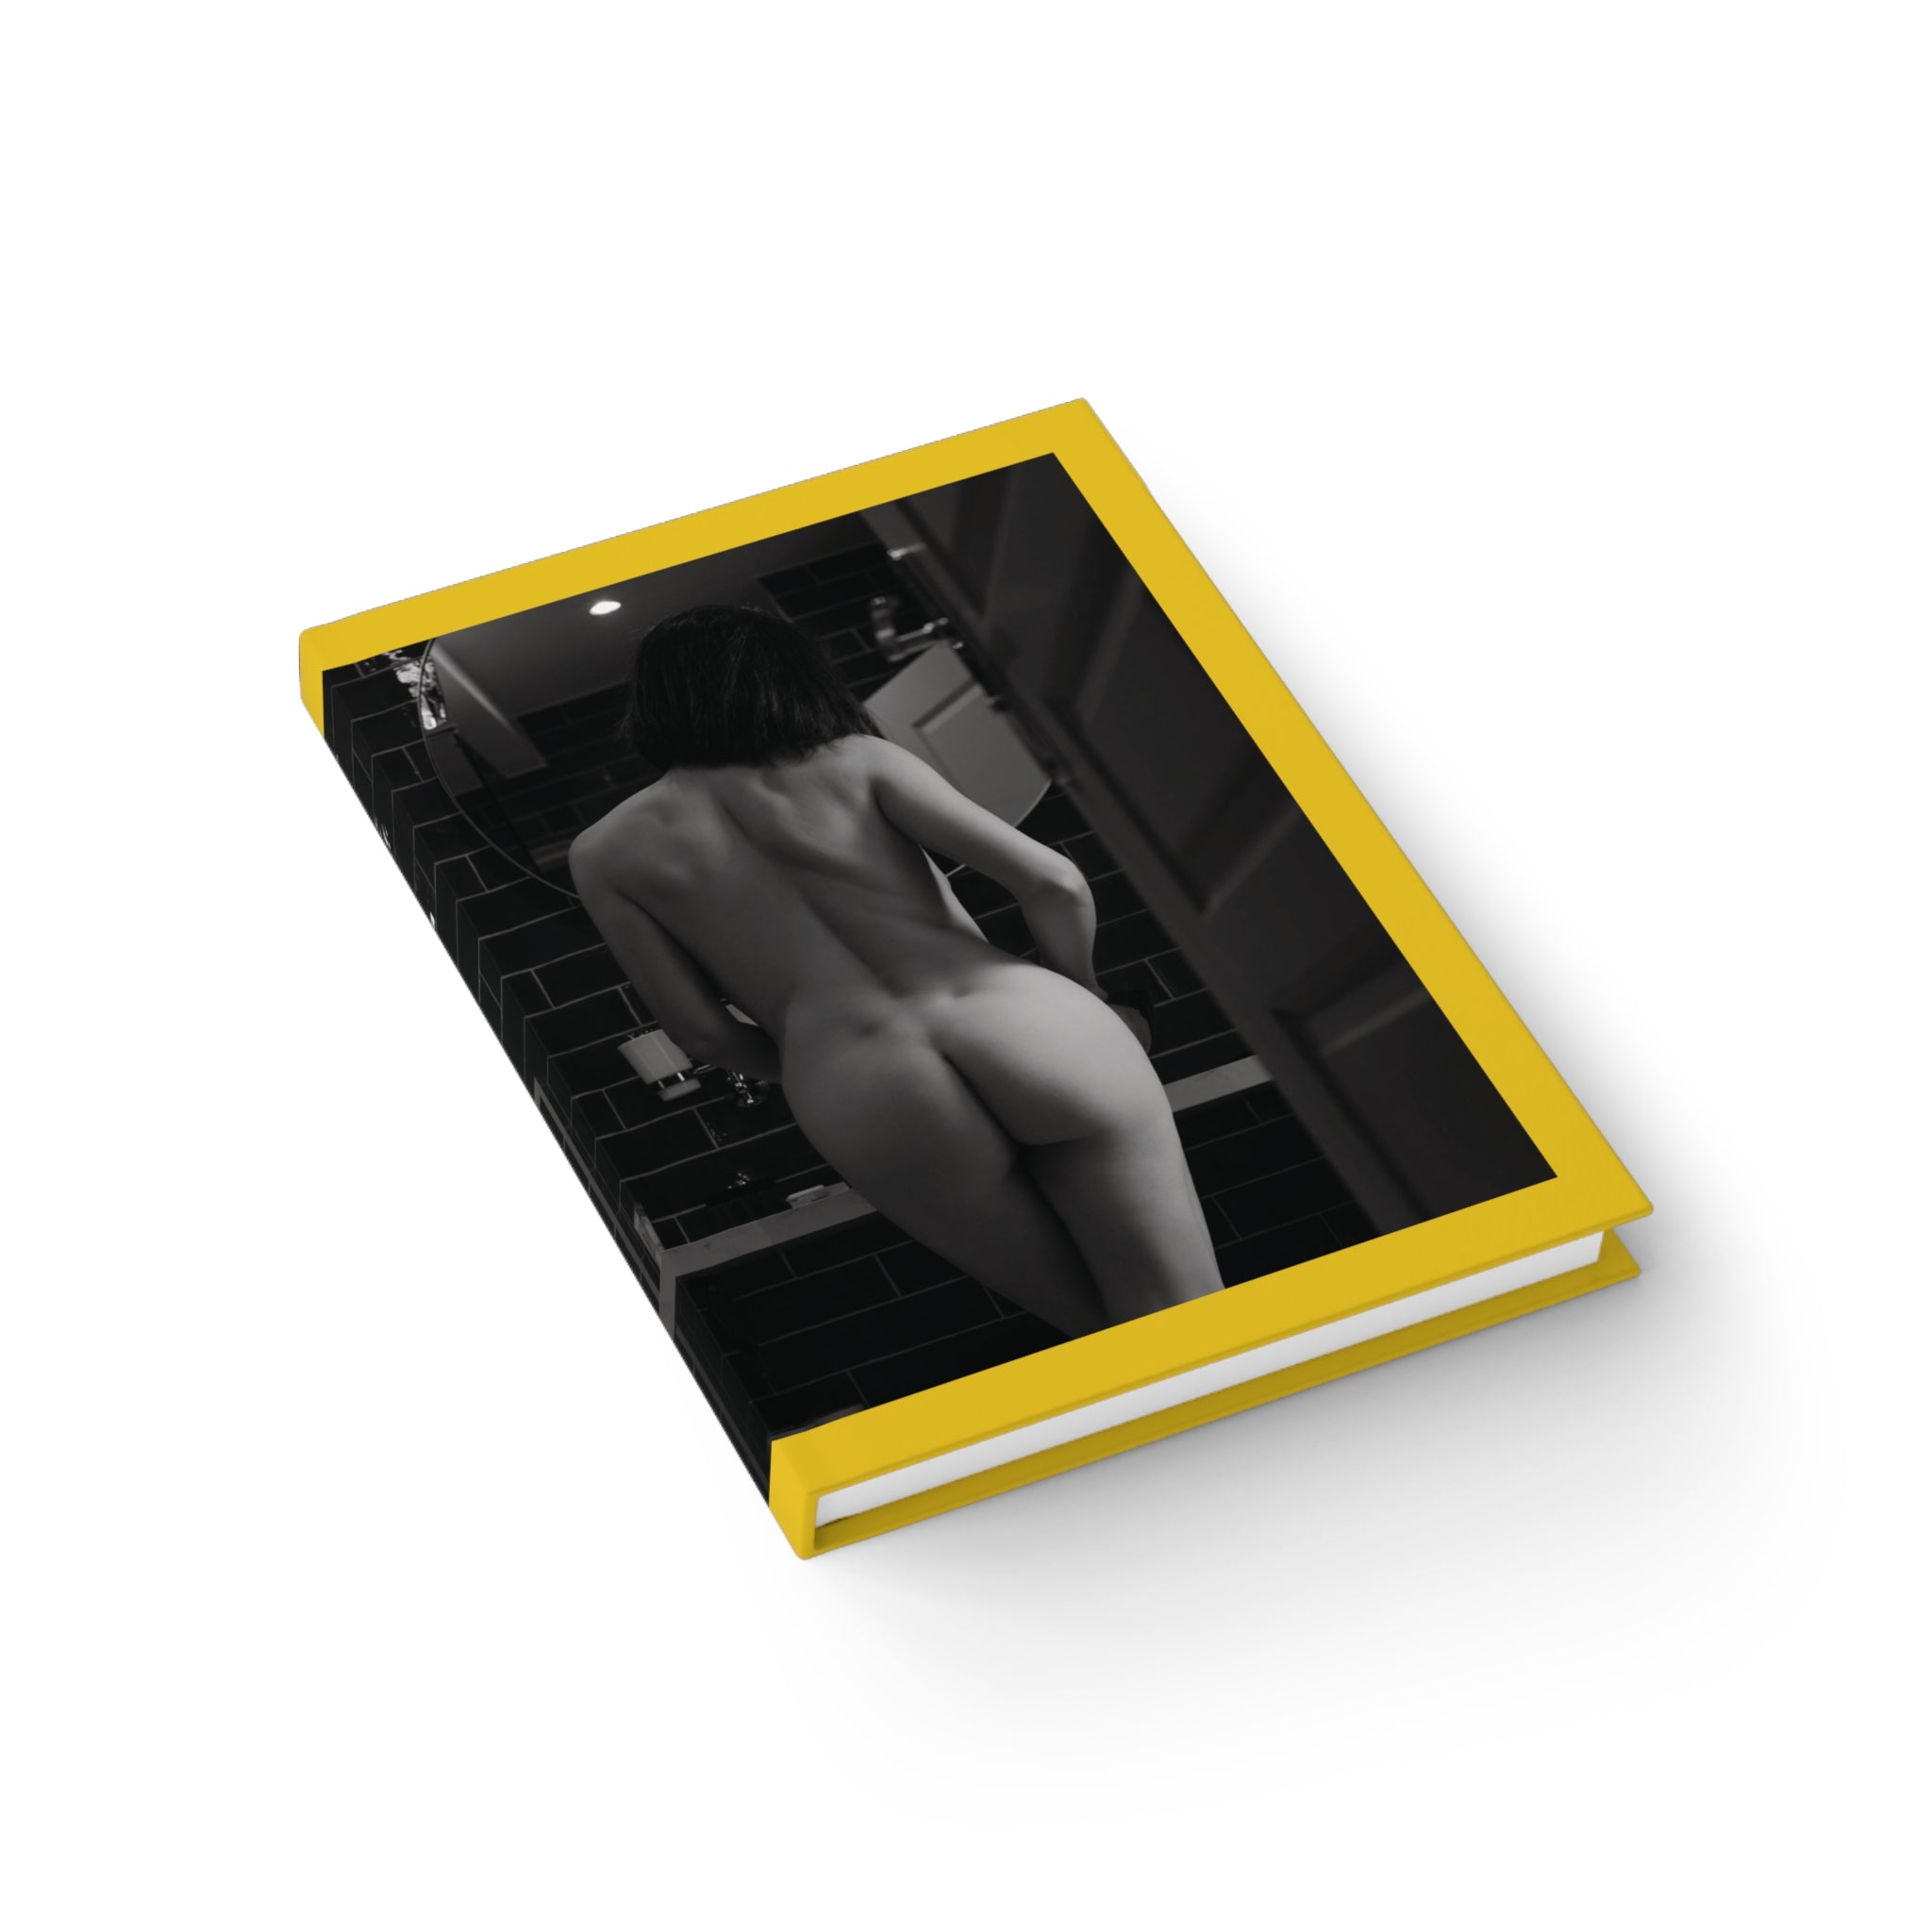 Nude Photography Photo Journal - Ruled Line